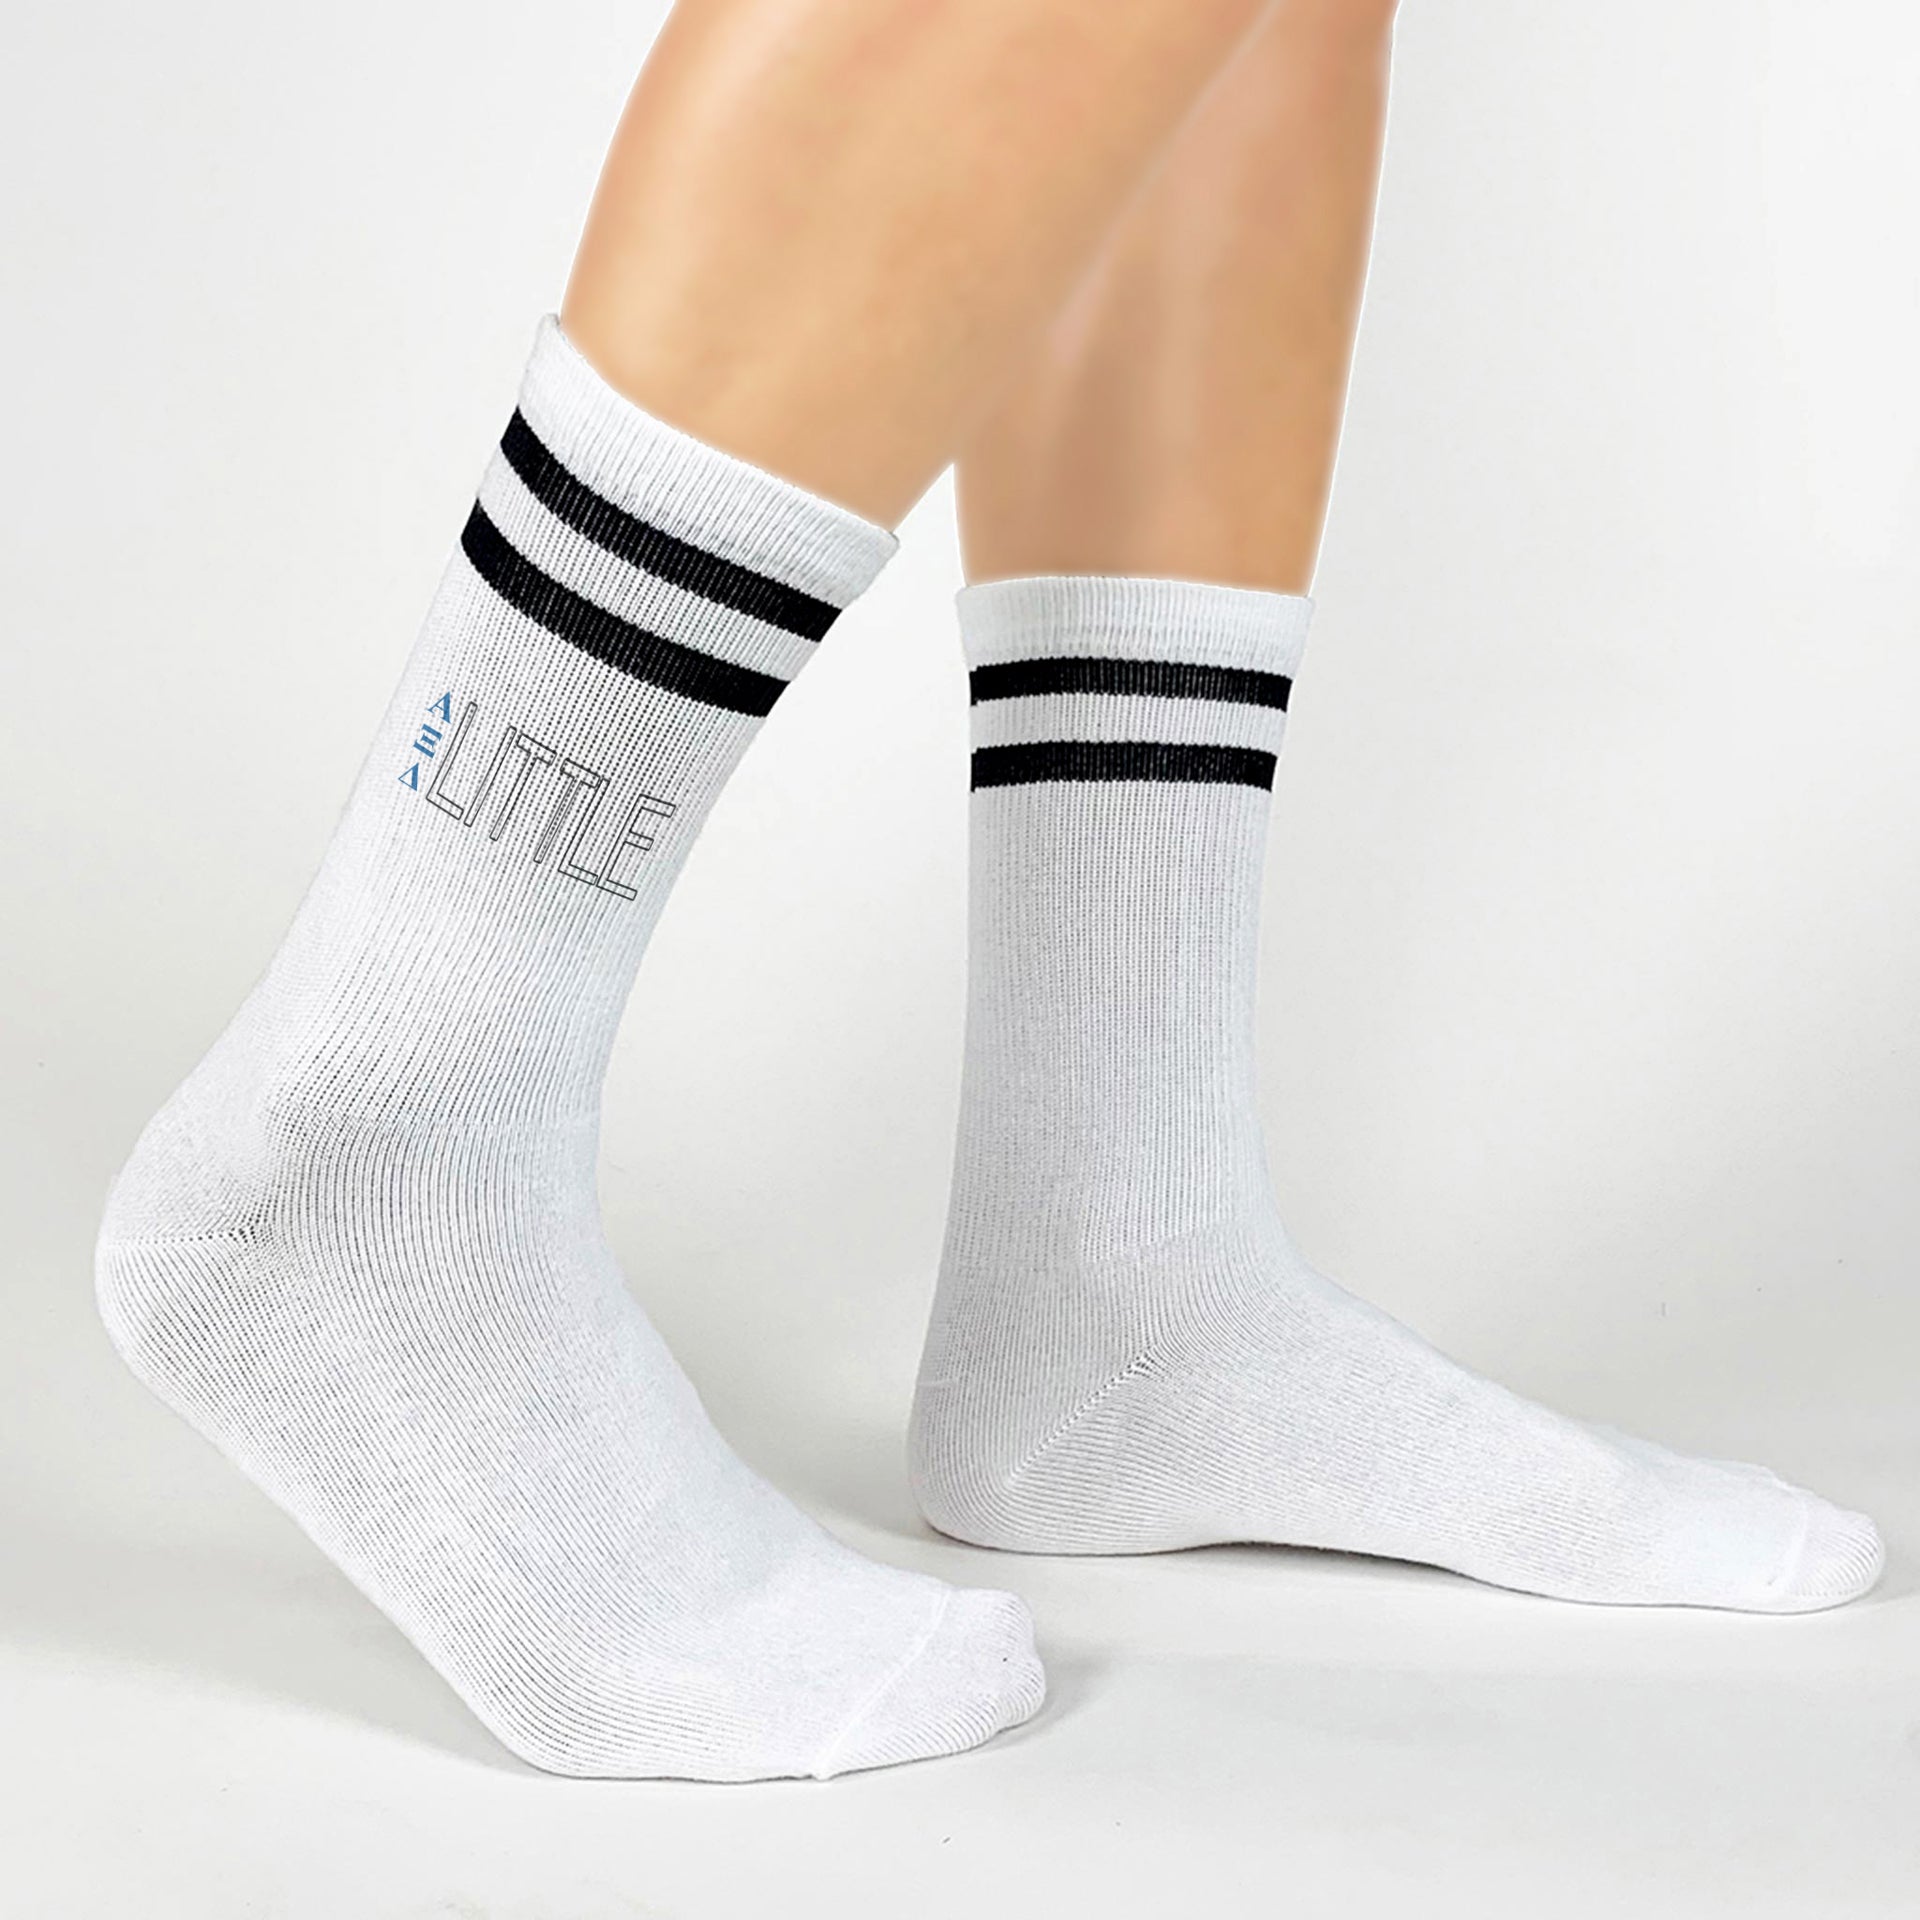 Sorority letters with Little digitally printed on comfy white crew socks with black stripes make the perfect gift for your sorority sisters.